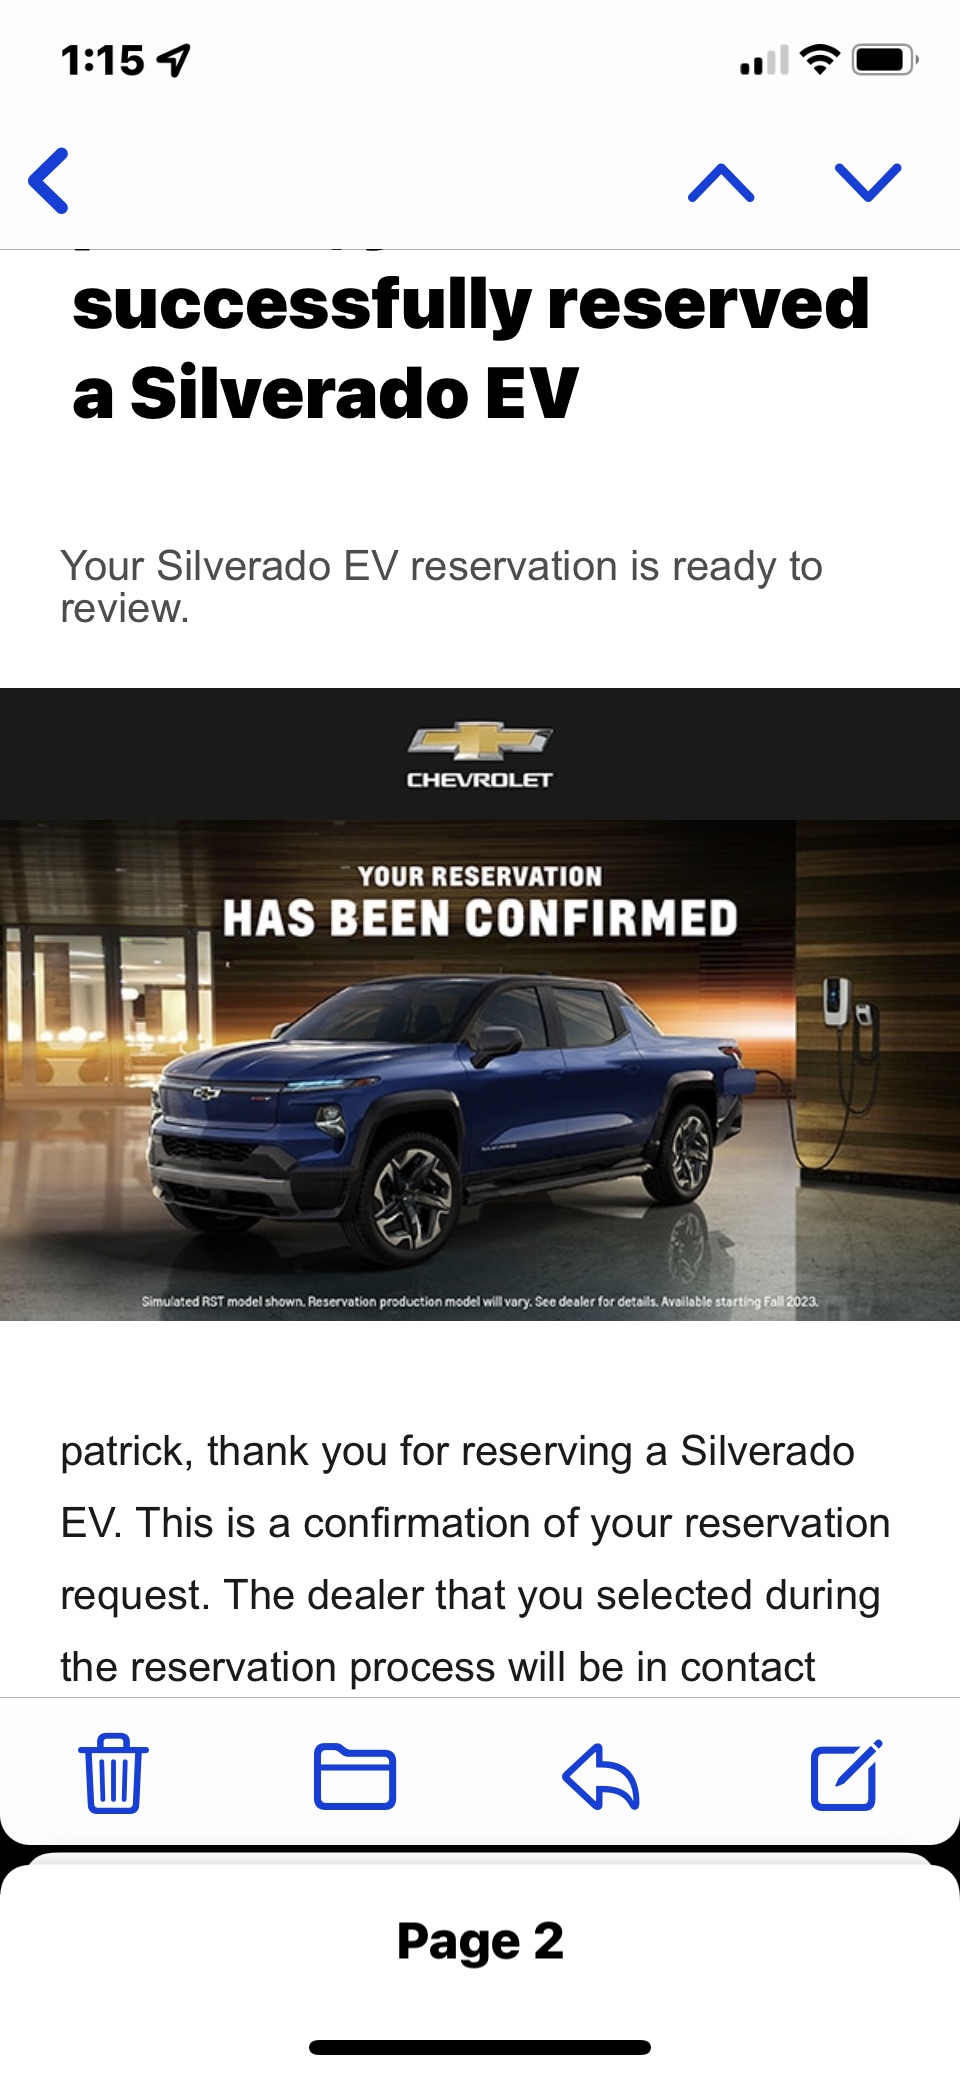 Ford F-150 Lightning Wave 3 invites who don't order won't be cancelled; possible Pro / XLT ordering reopening patrick, you’ve successfully reserved a Silverado EV-2